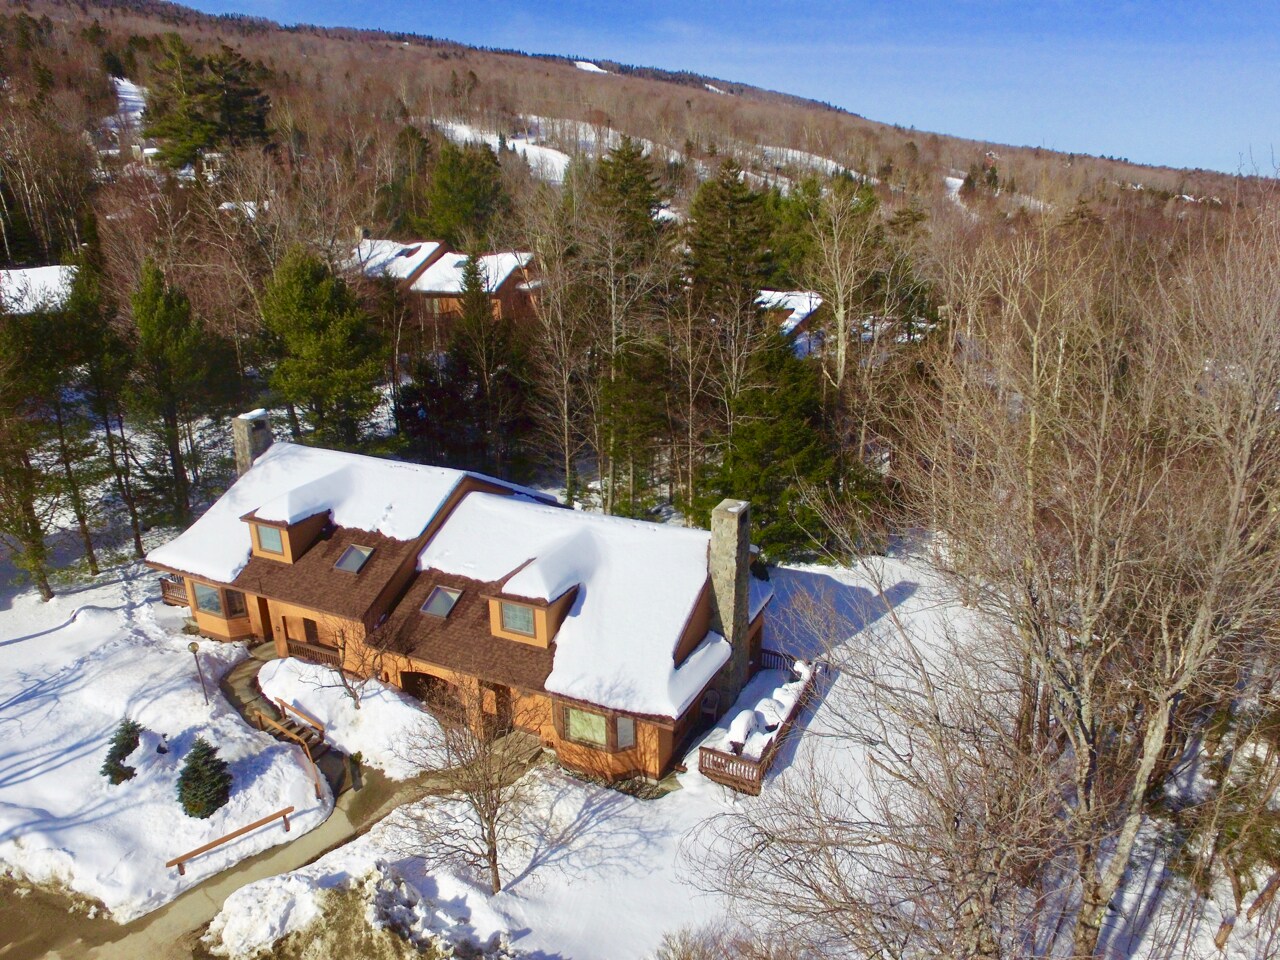 This family-friendly, lovely all-season townhome located slope side in the Forest Cottage development is a few minute walk from the world class ski trails and close to all that Bretton Woods has to offer. Immerse yourself in the beautiful scenery of the p